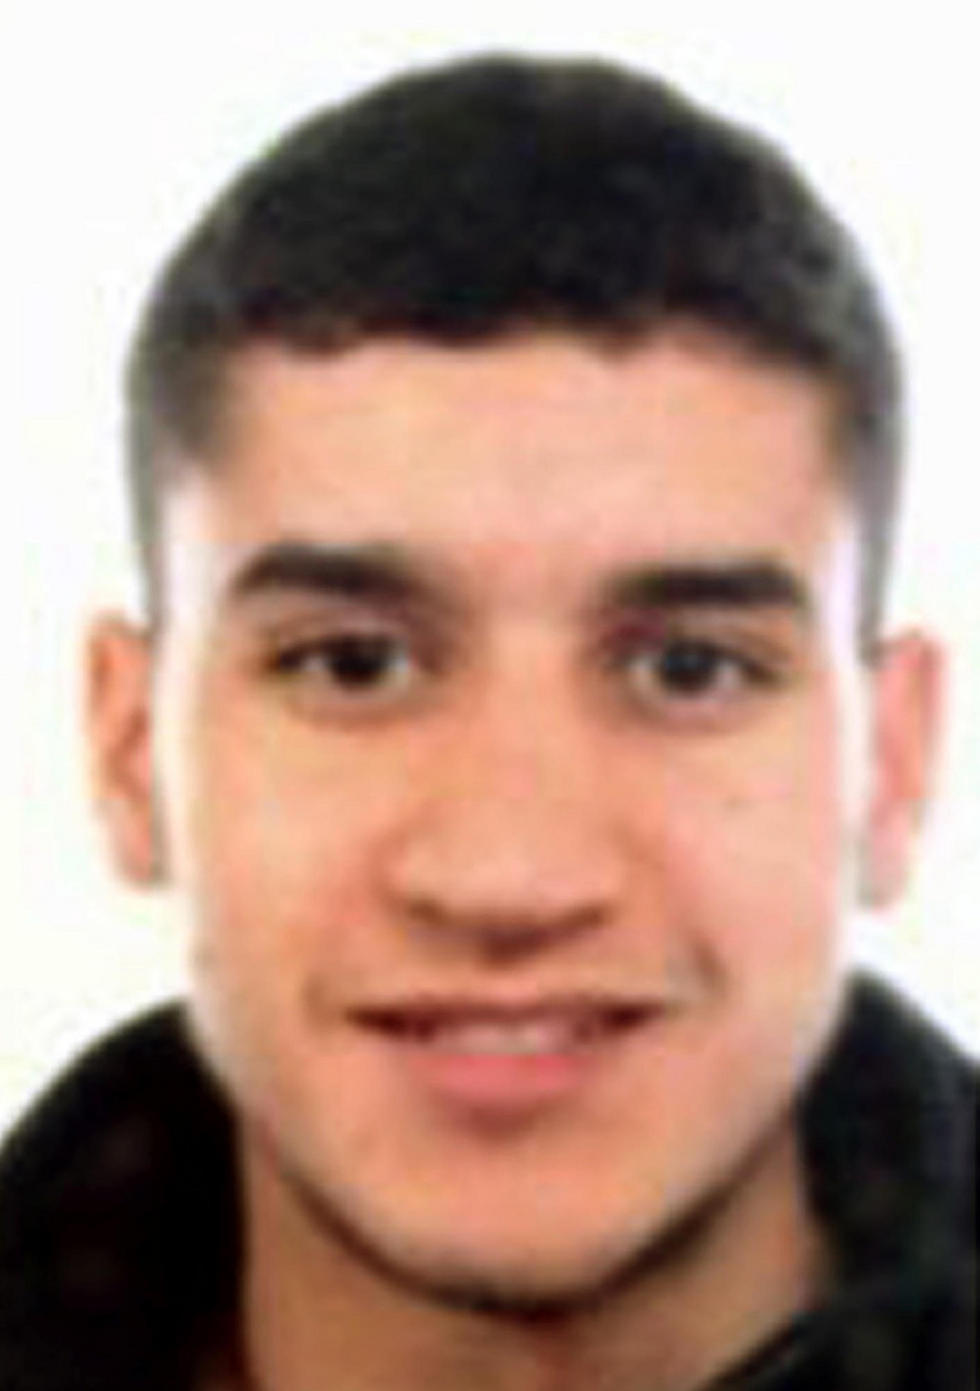  Younes Abouyaaquoub, one of the suspected terrorists in Friday's attacks (Photo: AFP)